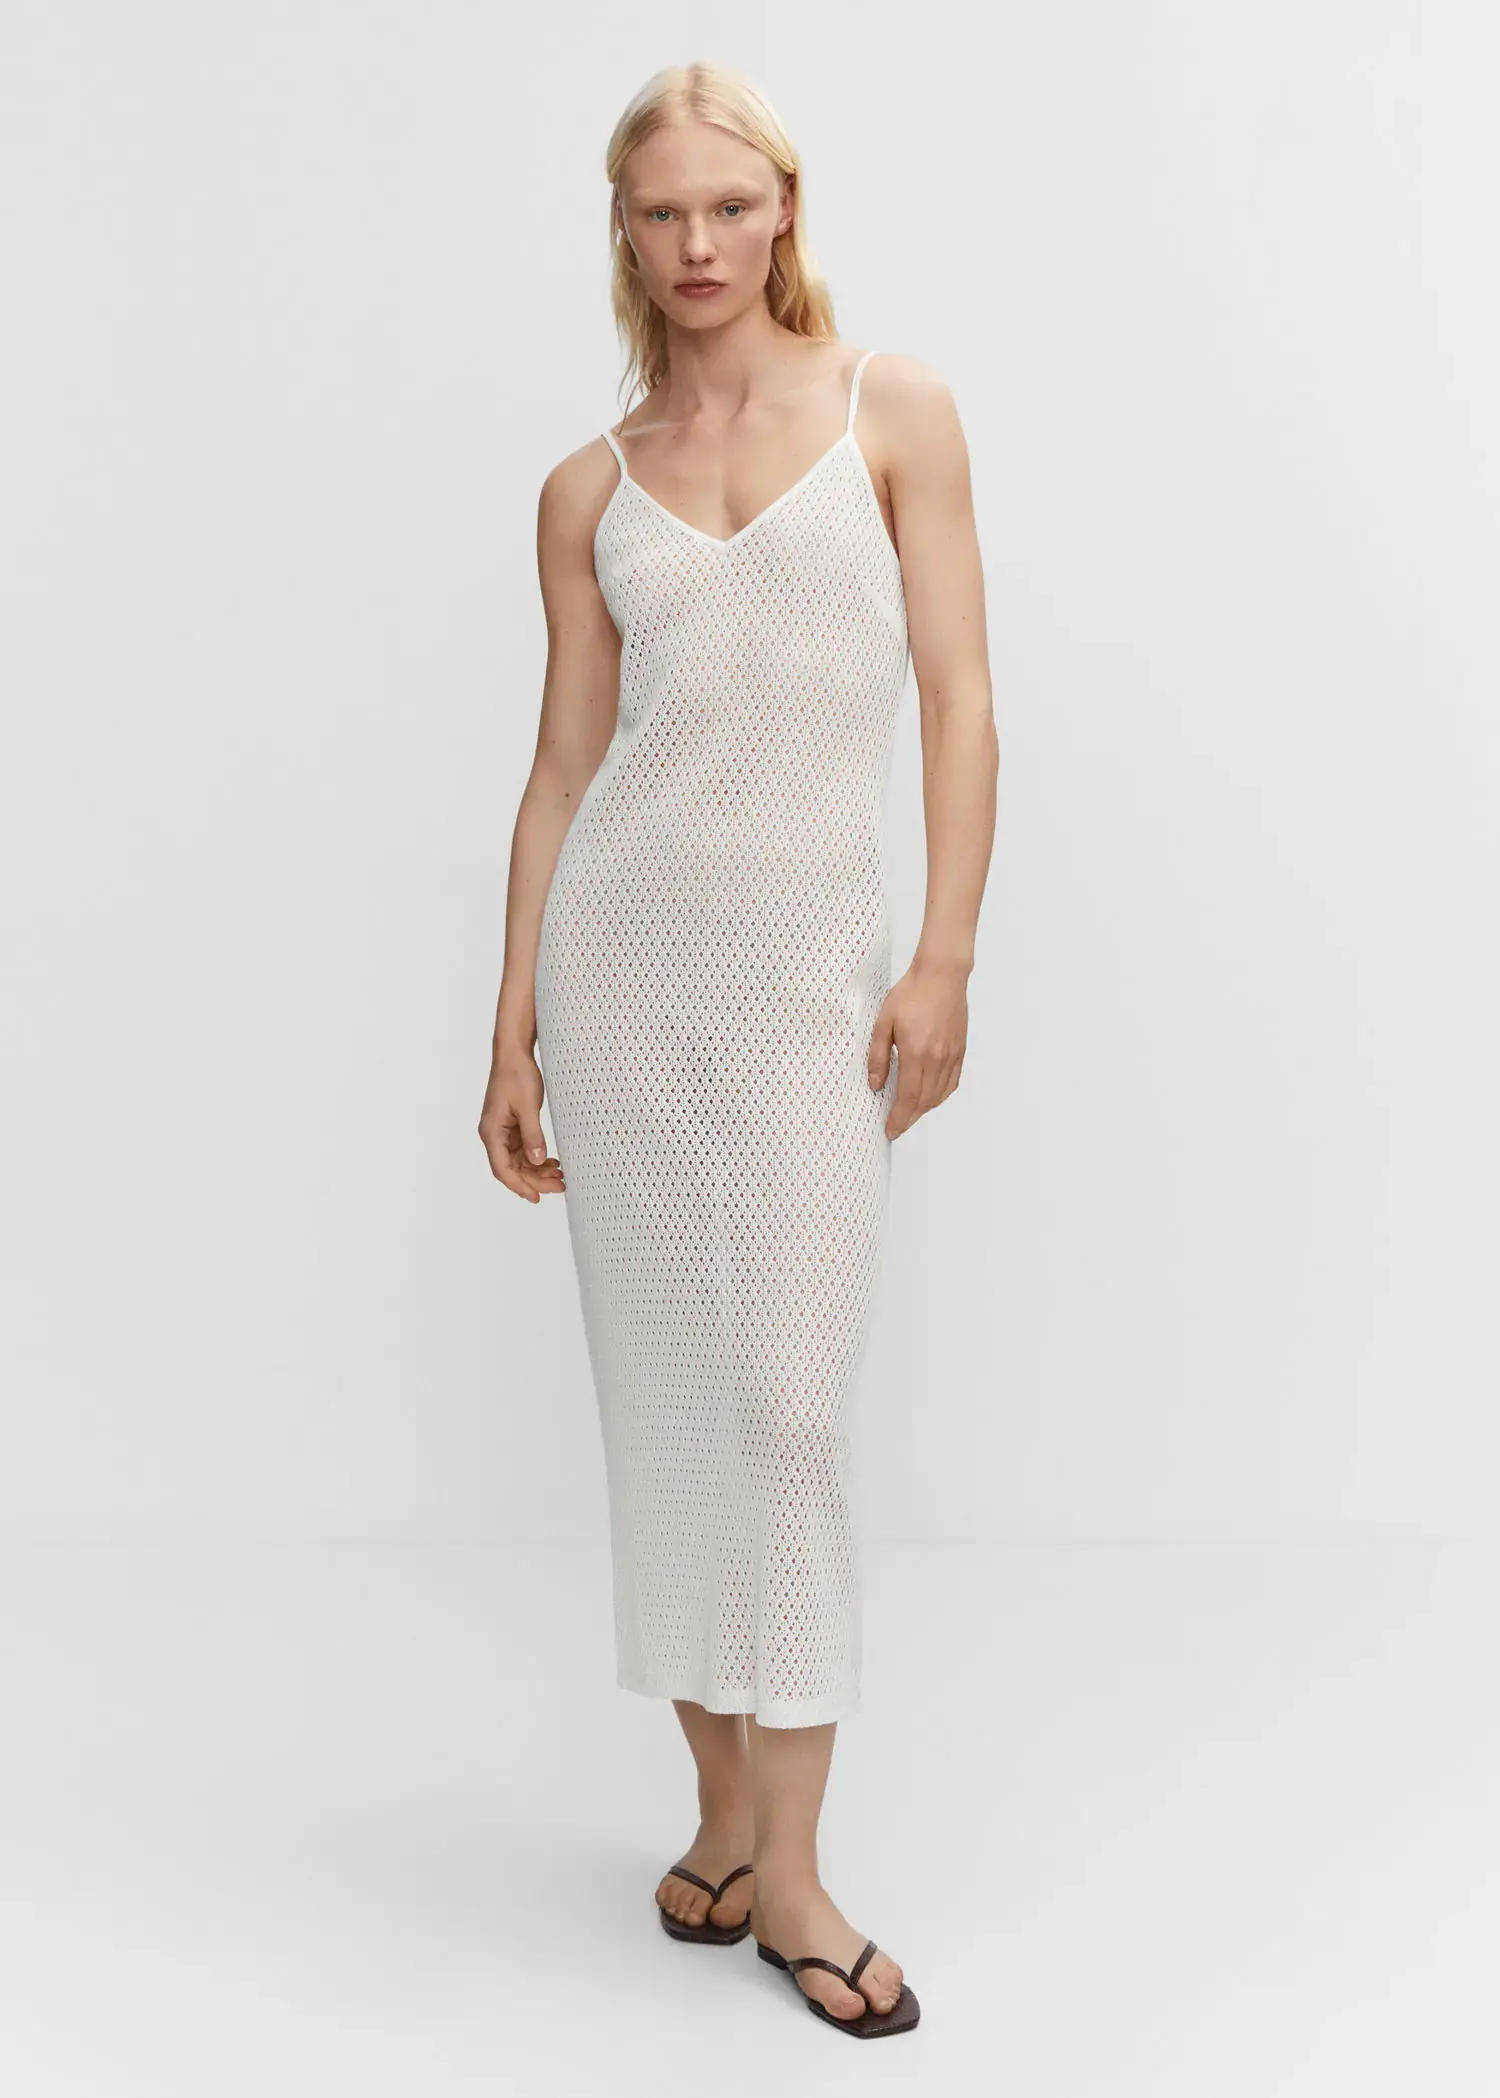 Mango Long openwork knitted dress. a woman in a white dress standing in front of a white wall. 